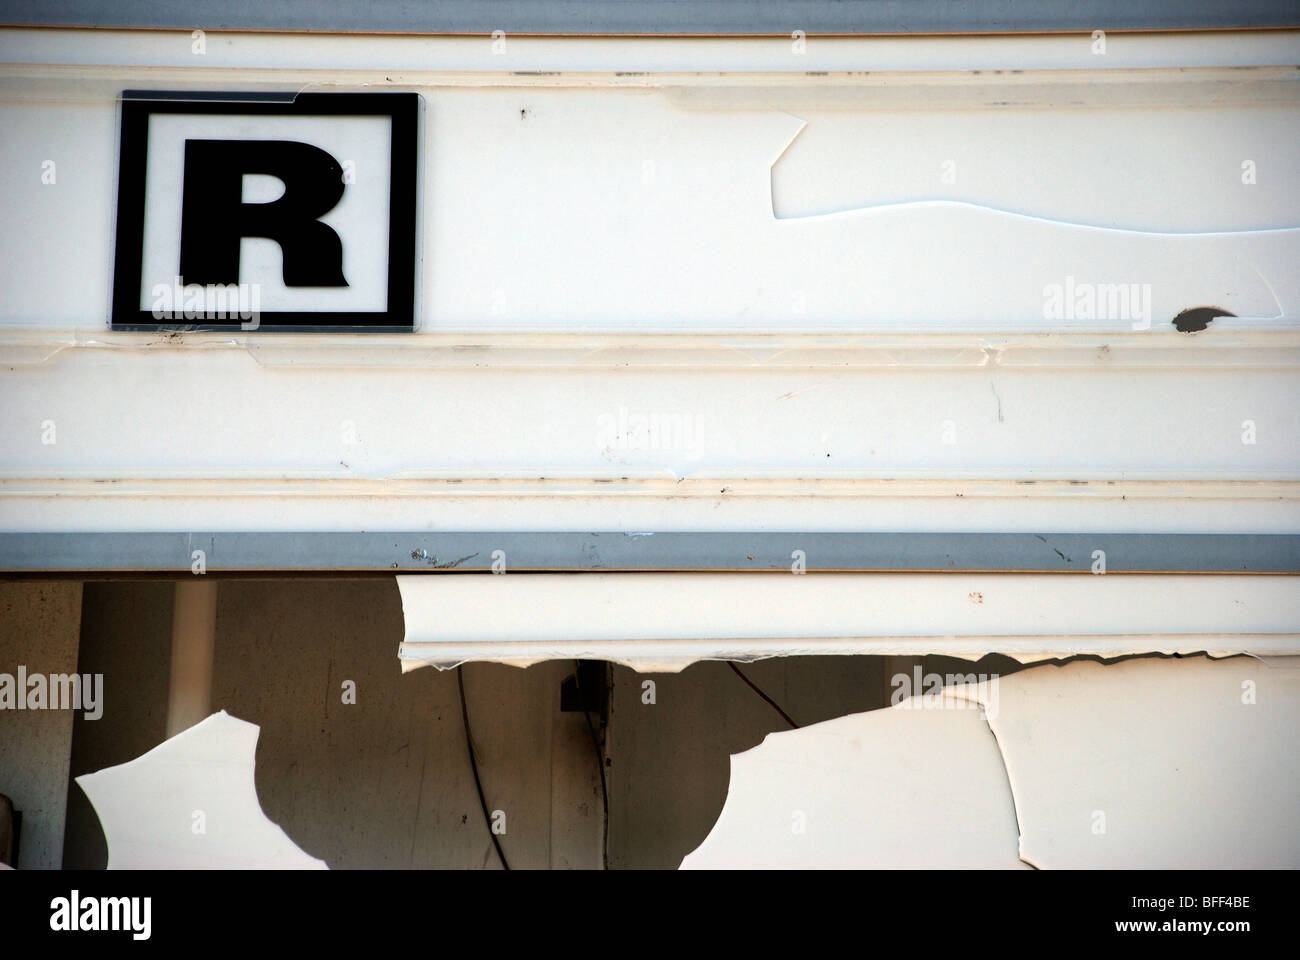 Rated R, found type on broken cinema marquee Stock Photo